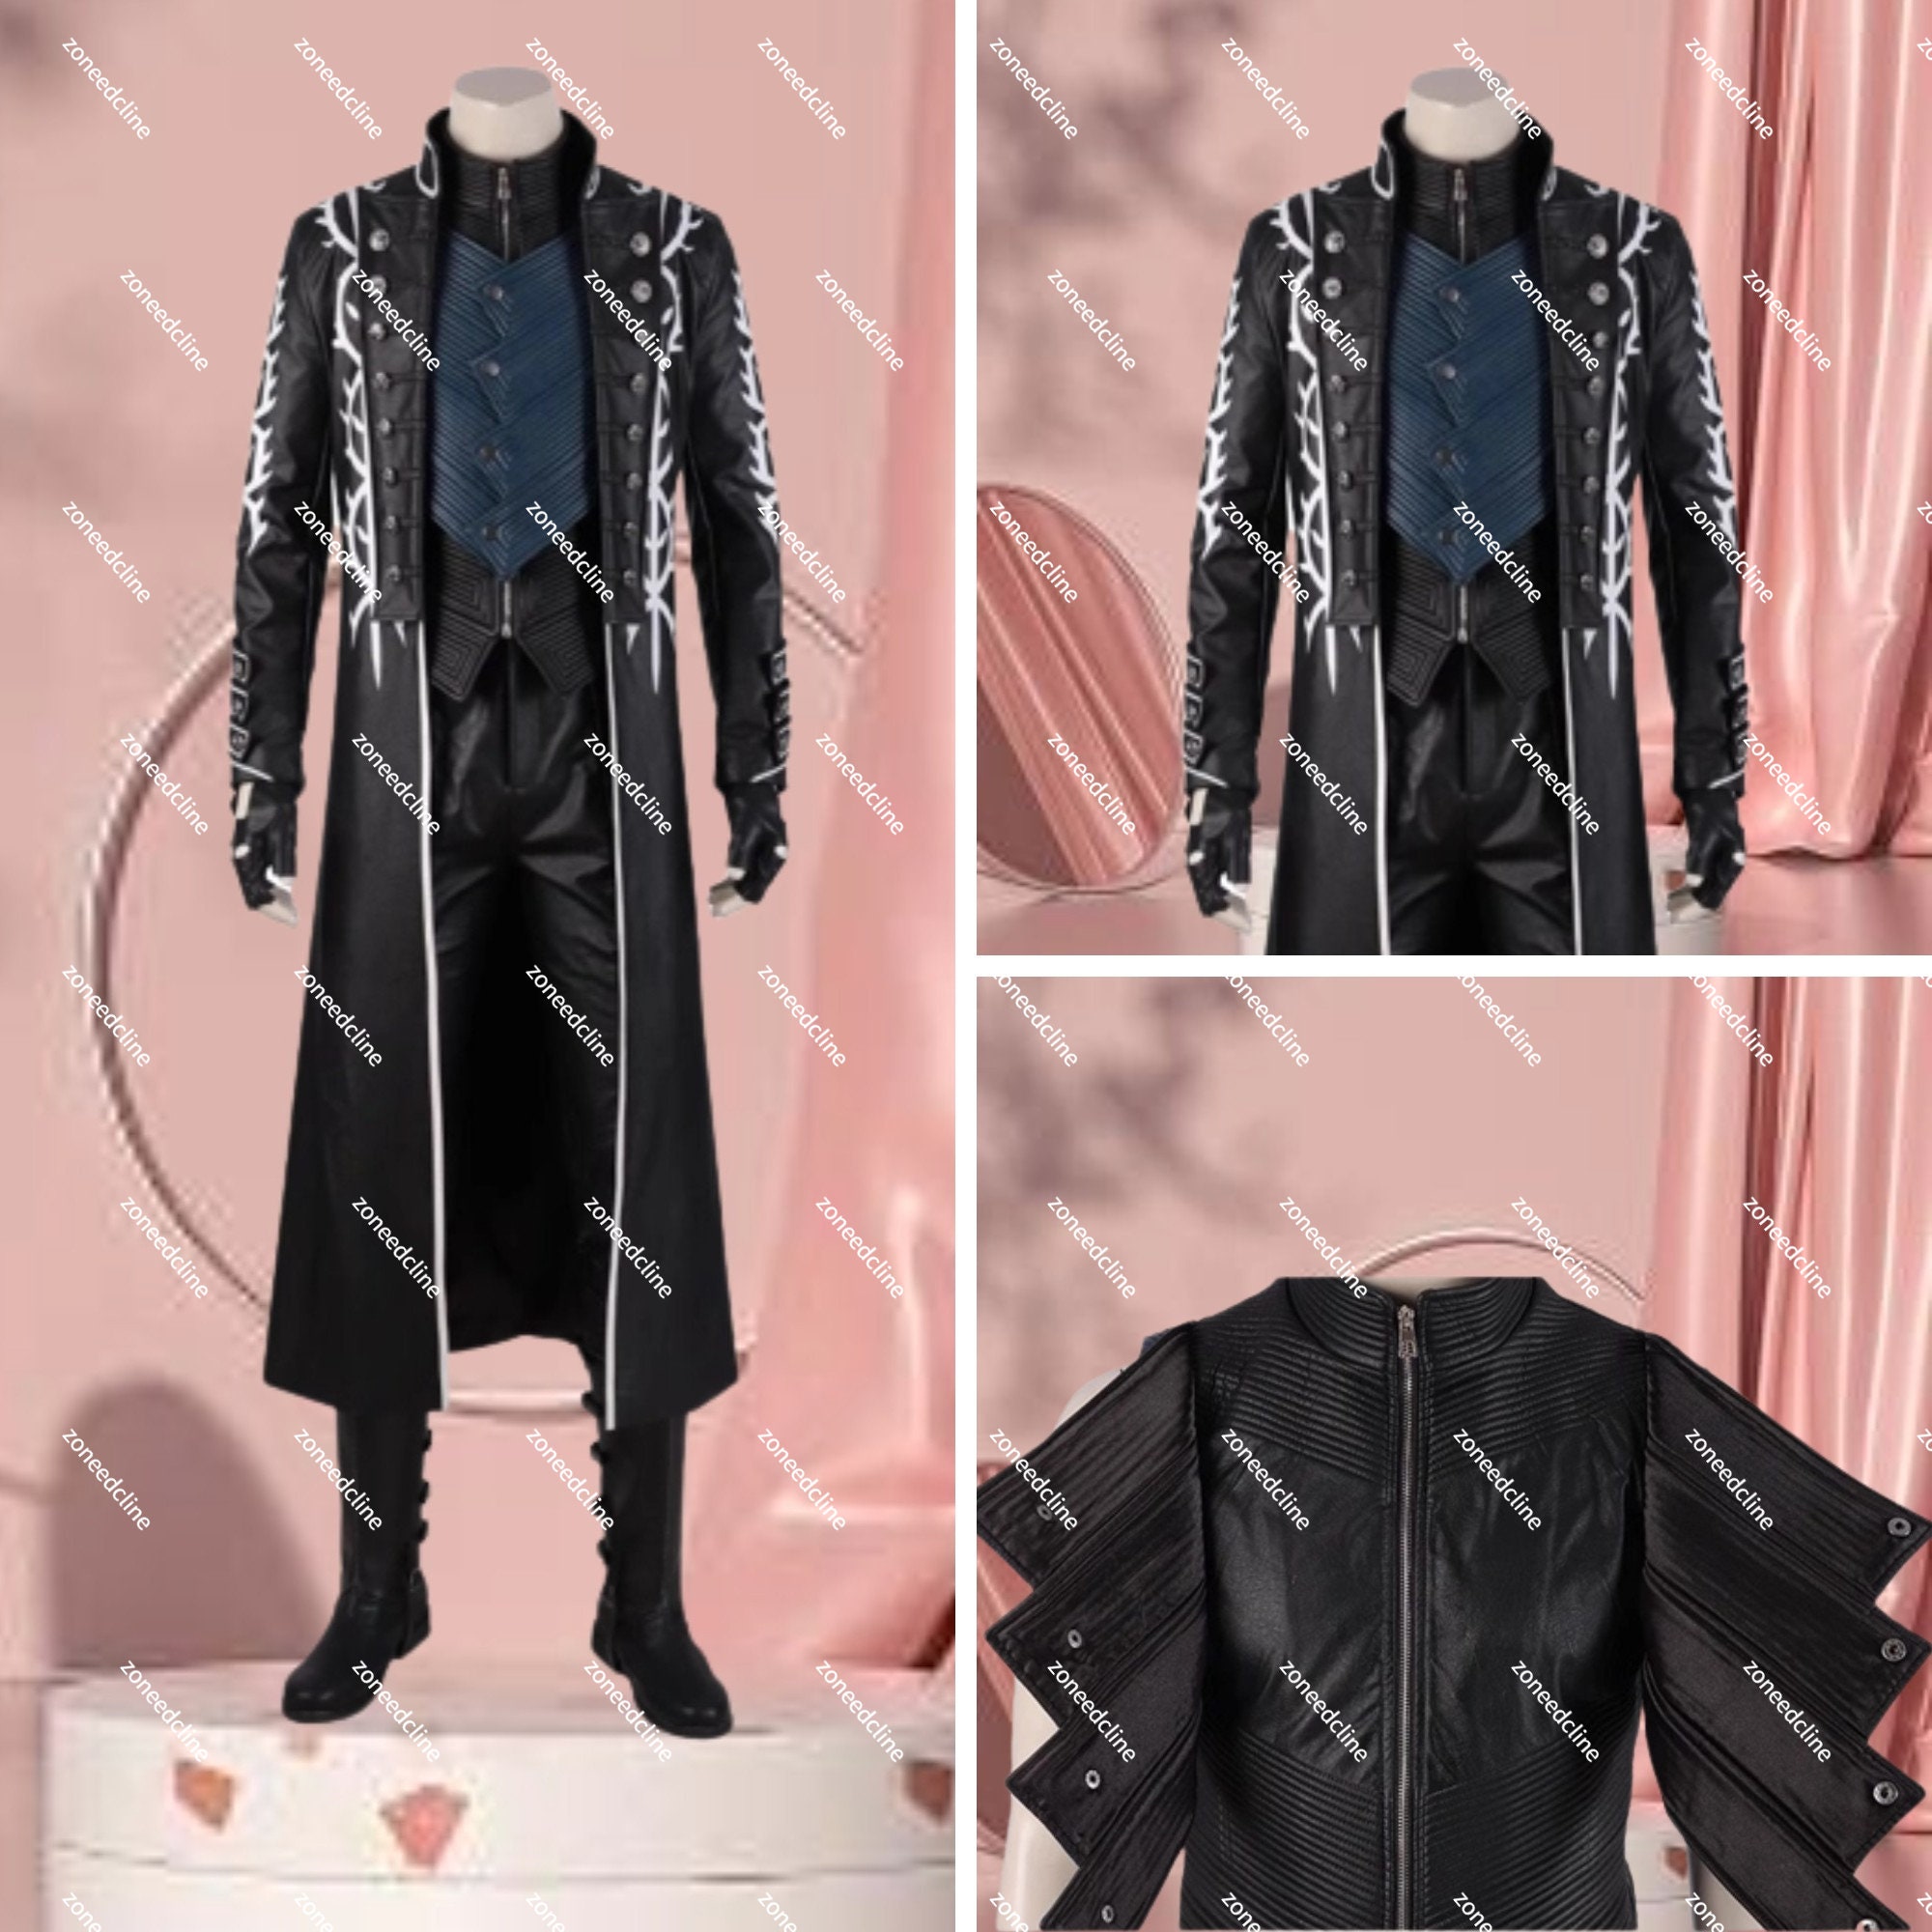 Buy Vergil coat replica Devil May Cry 3 - Free Test Coat - Free Shipping